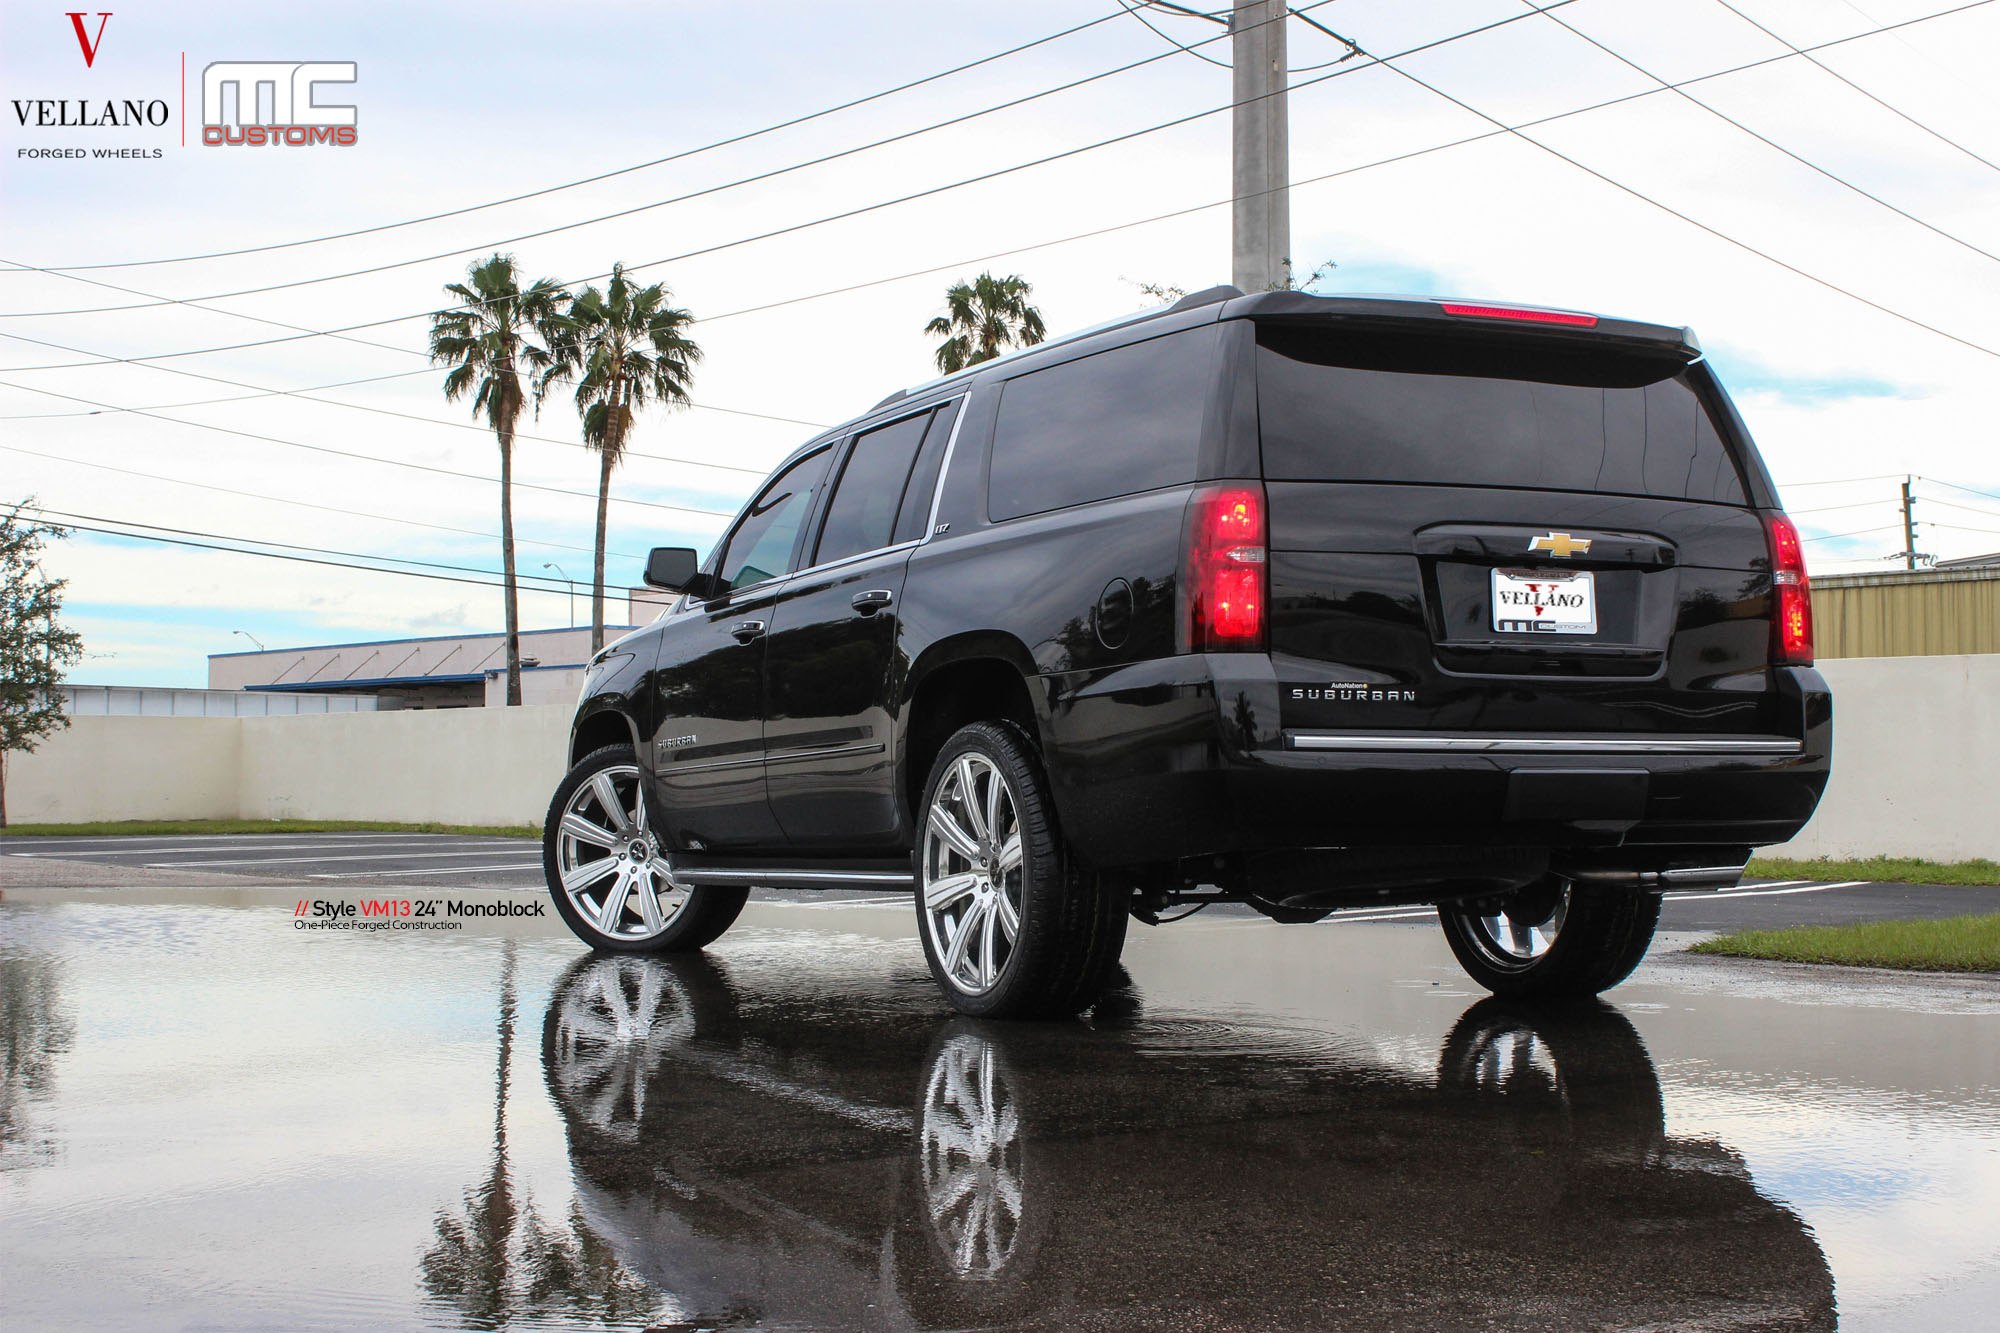 Roofline Spoiler with Light on Black Chevy Tahoe - Photo by Vellano